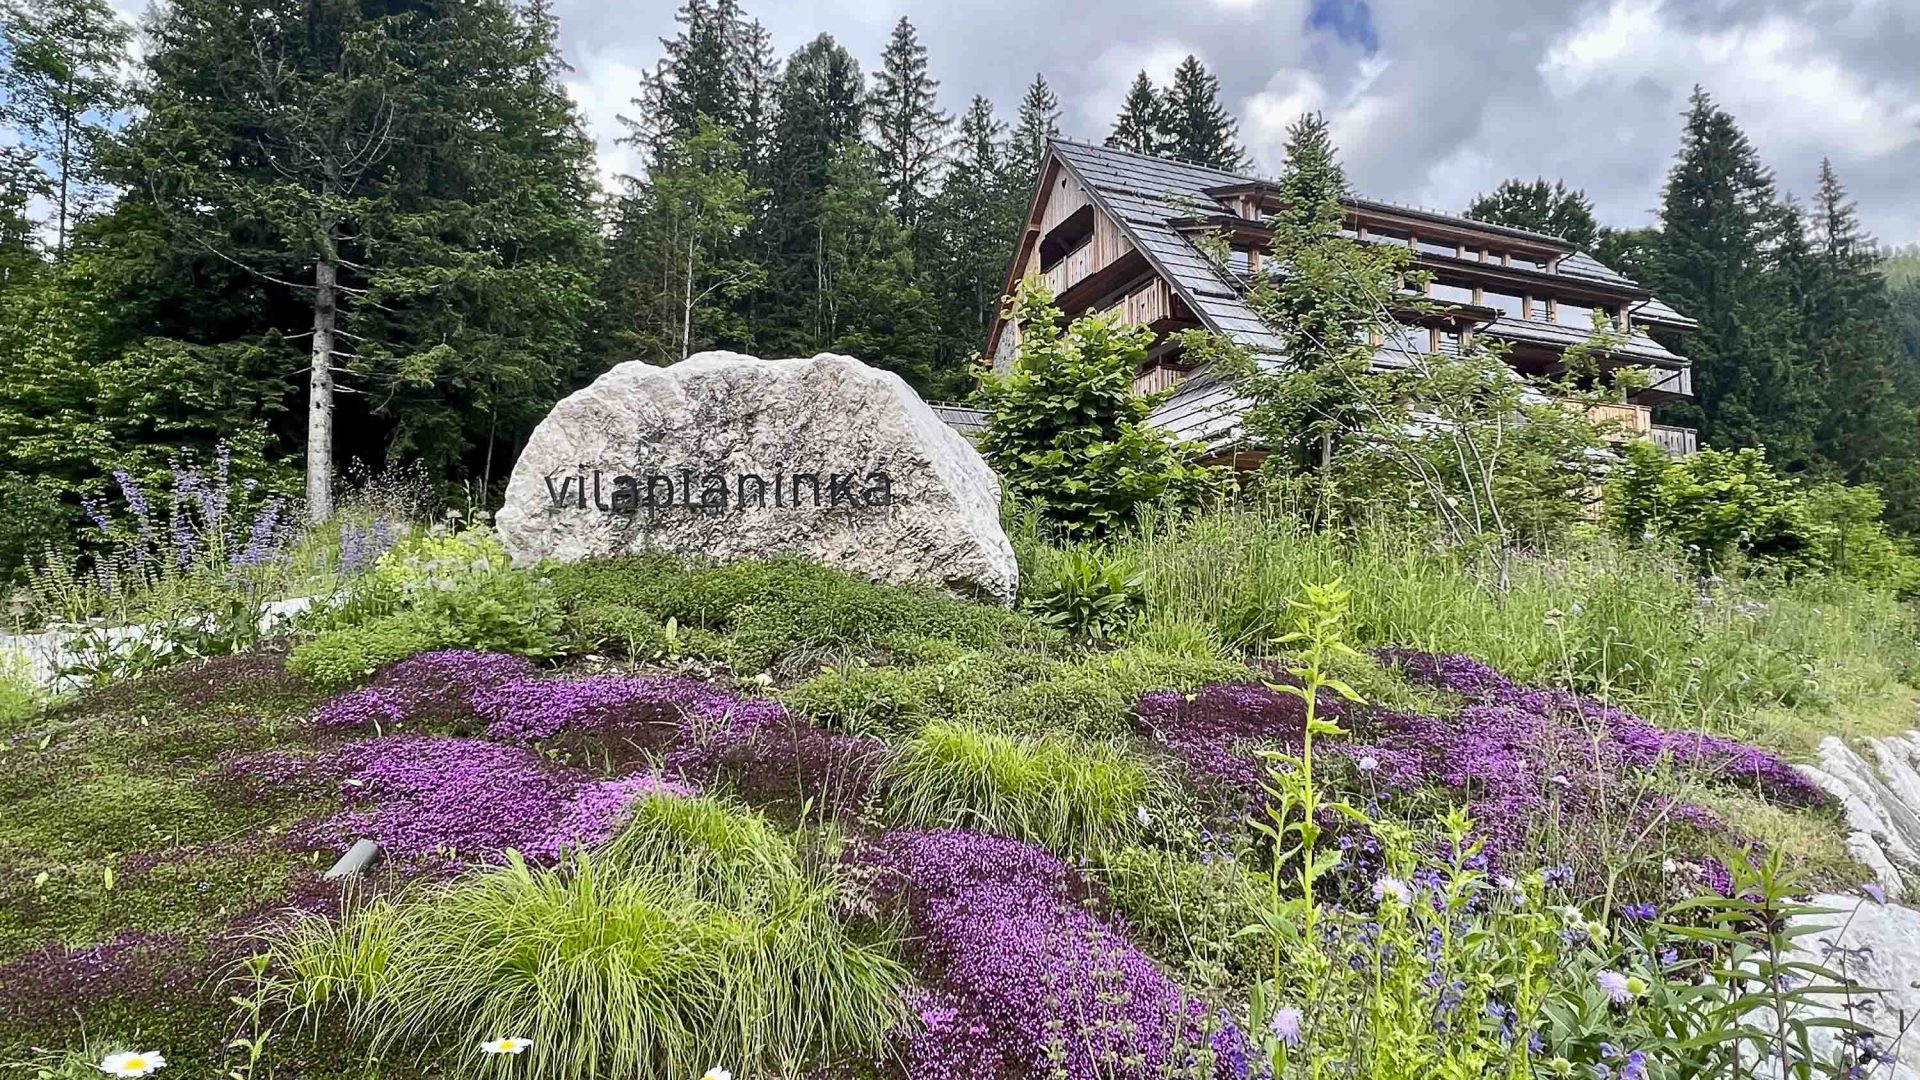 Villa Planinka with purple flowers in the foreground.